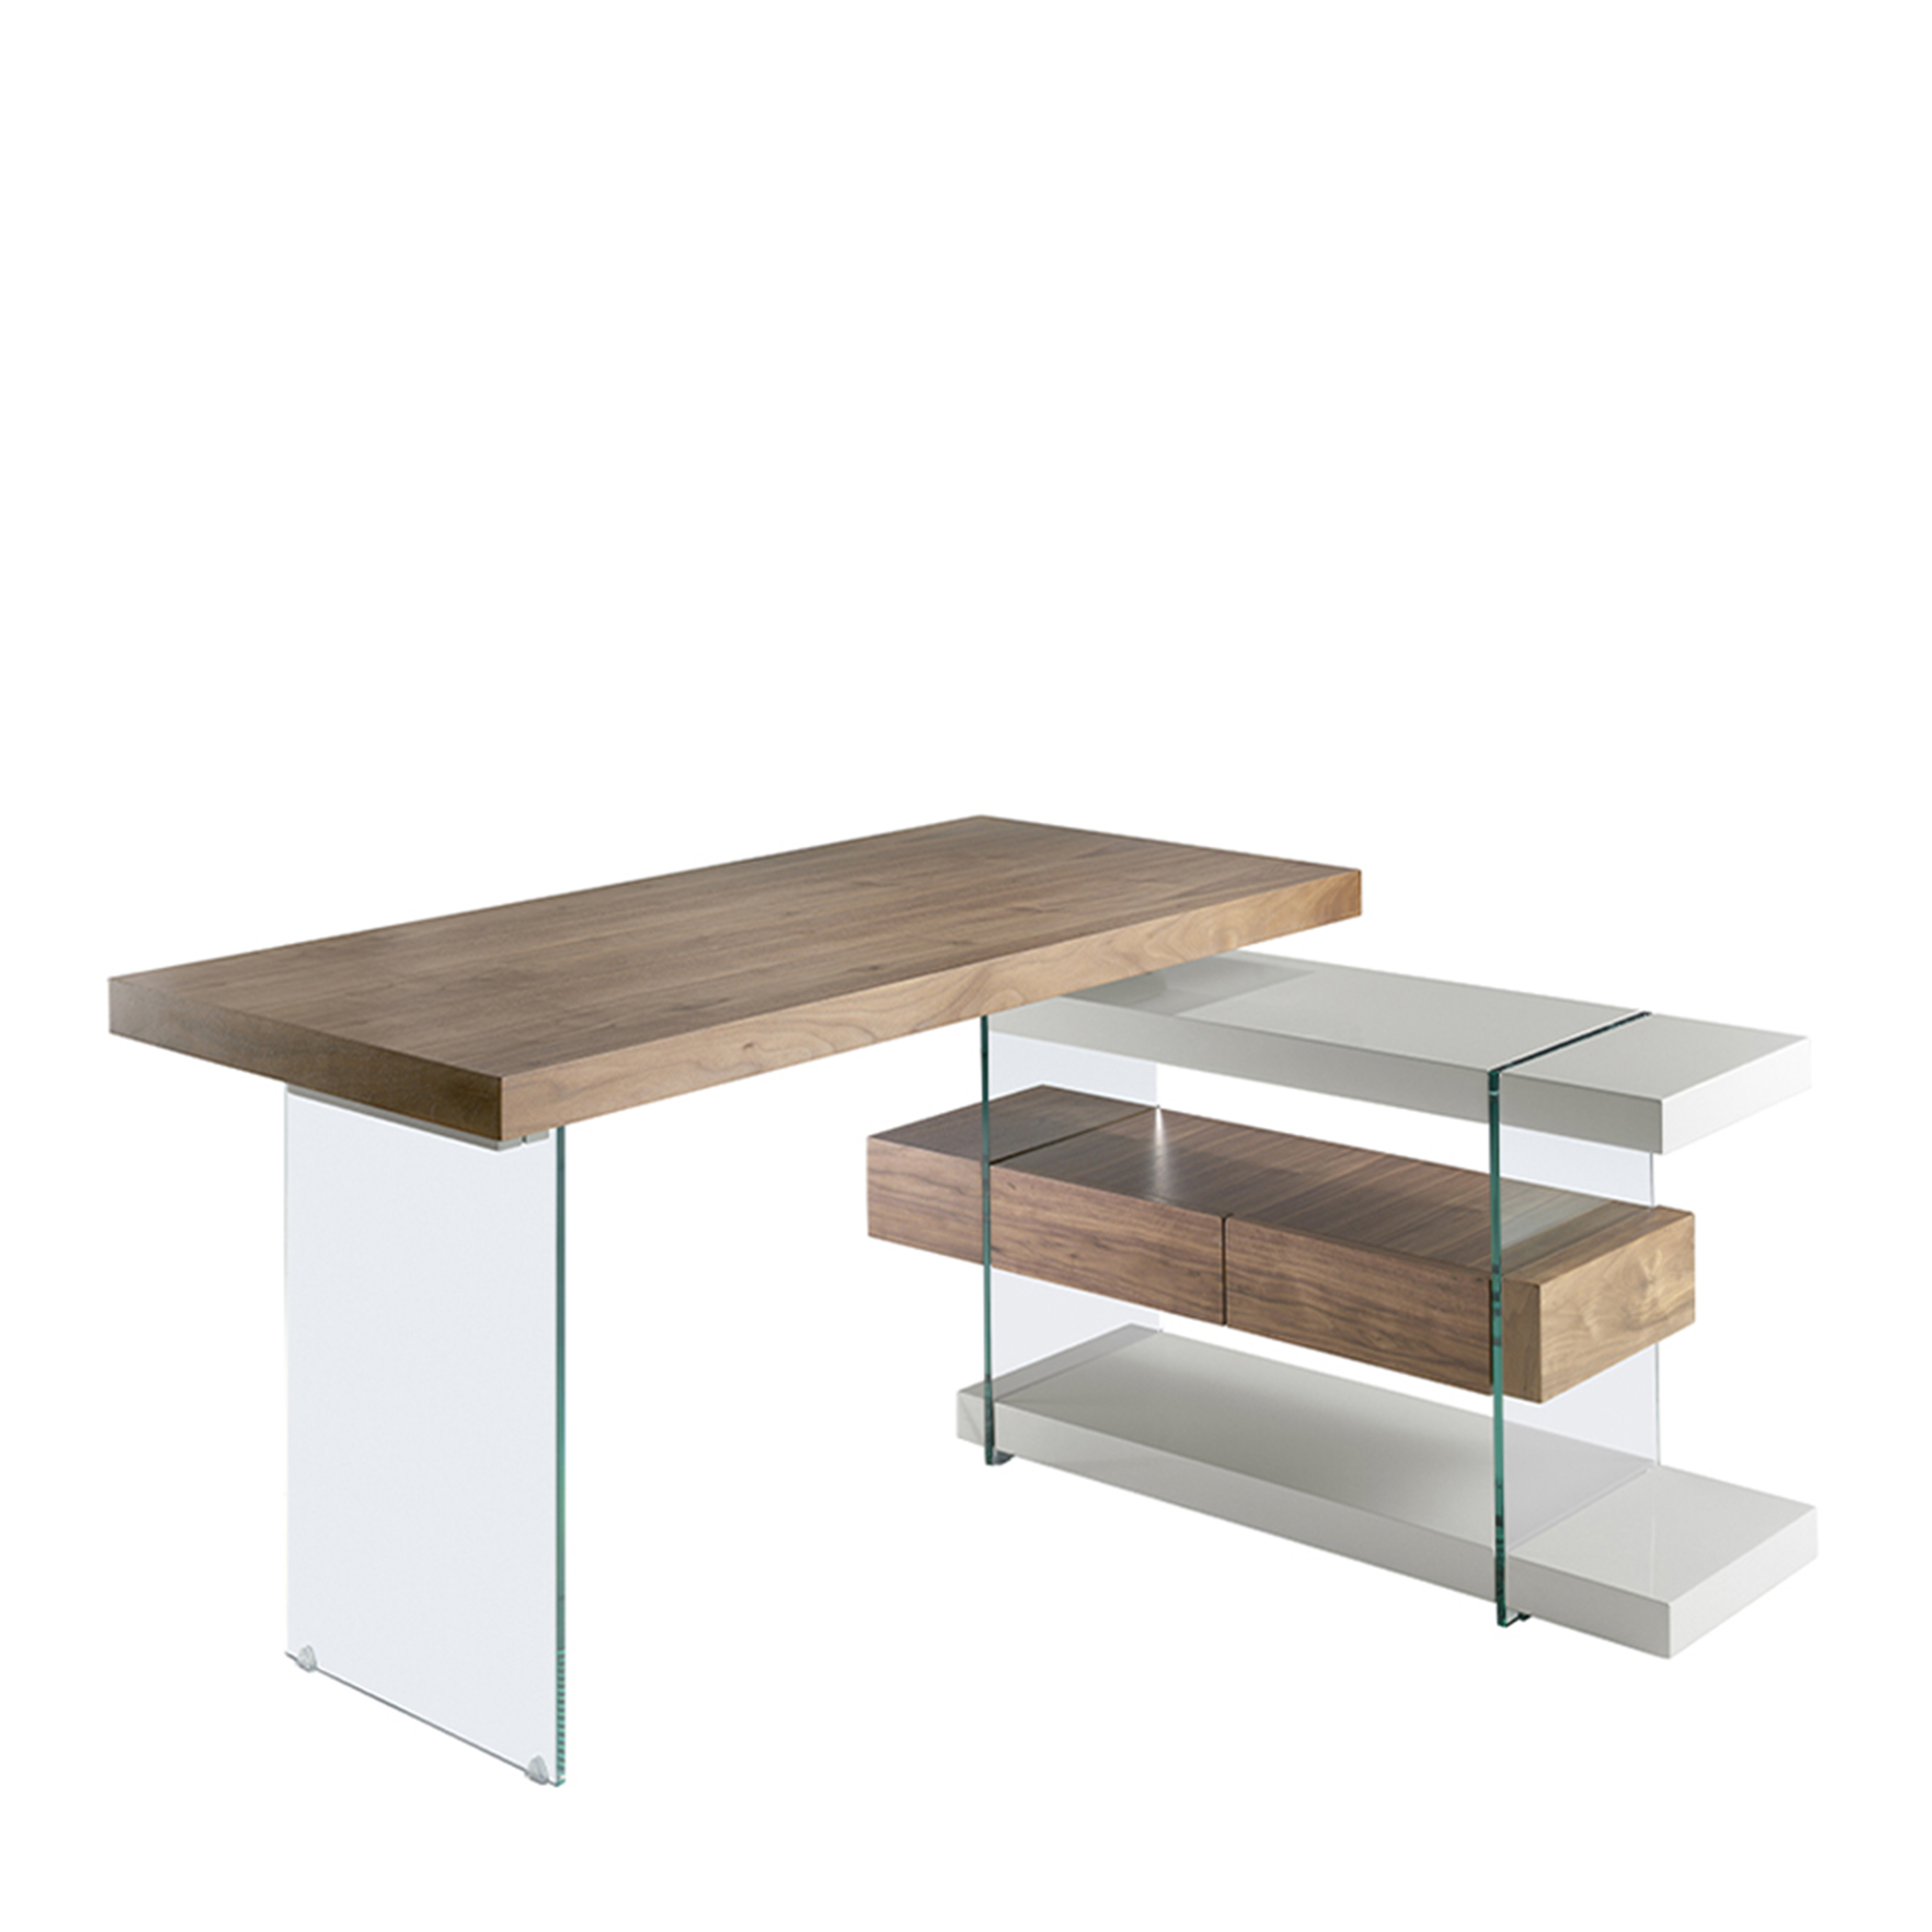 Walnut wood desk and tempered glass